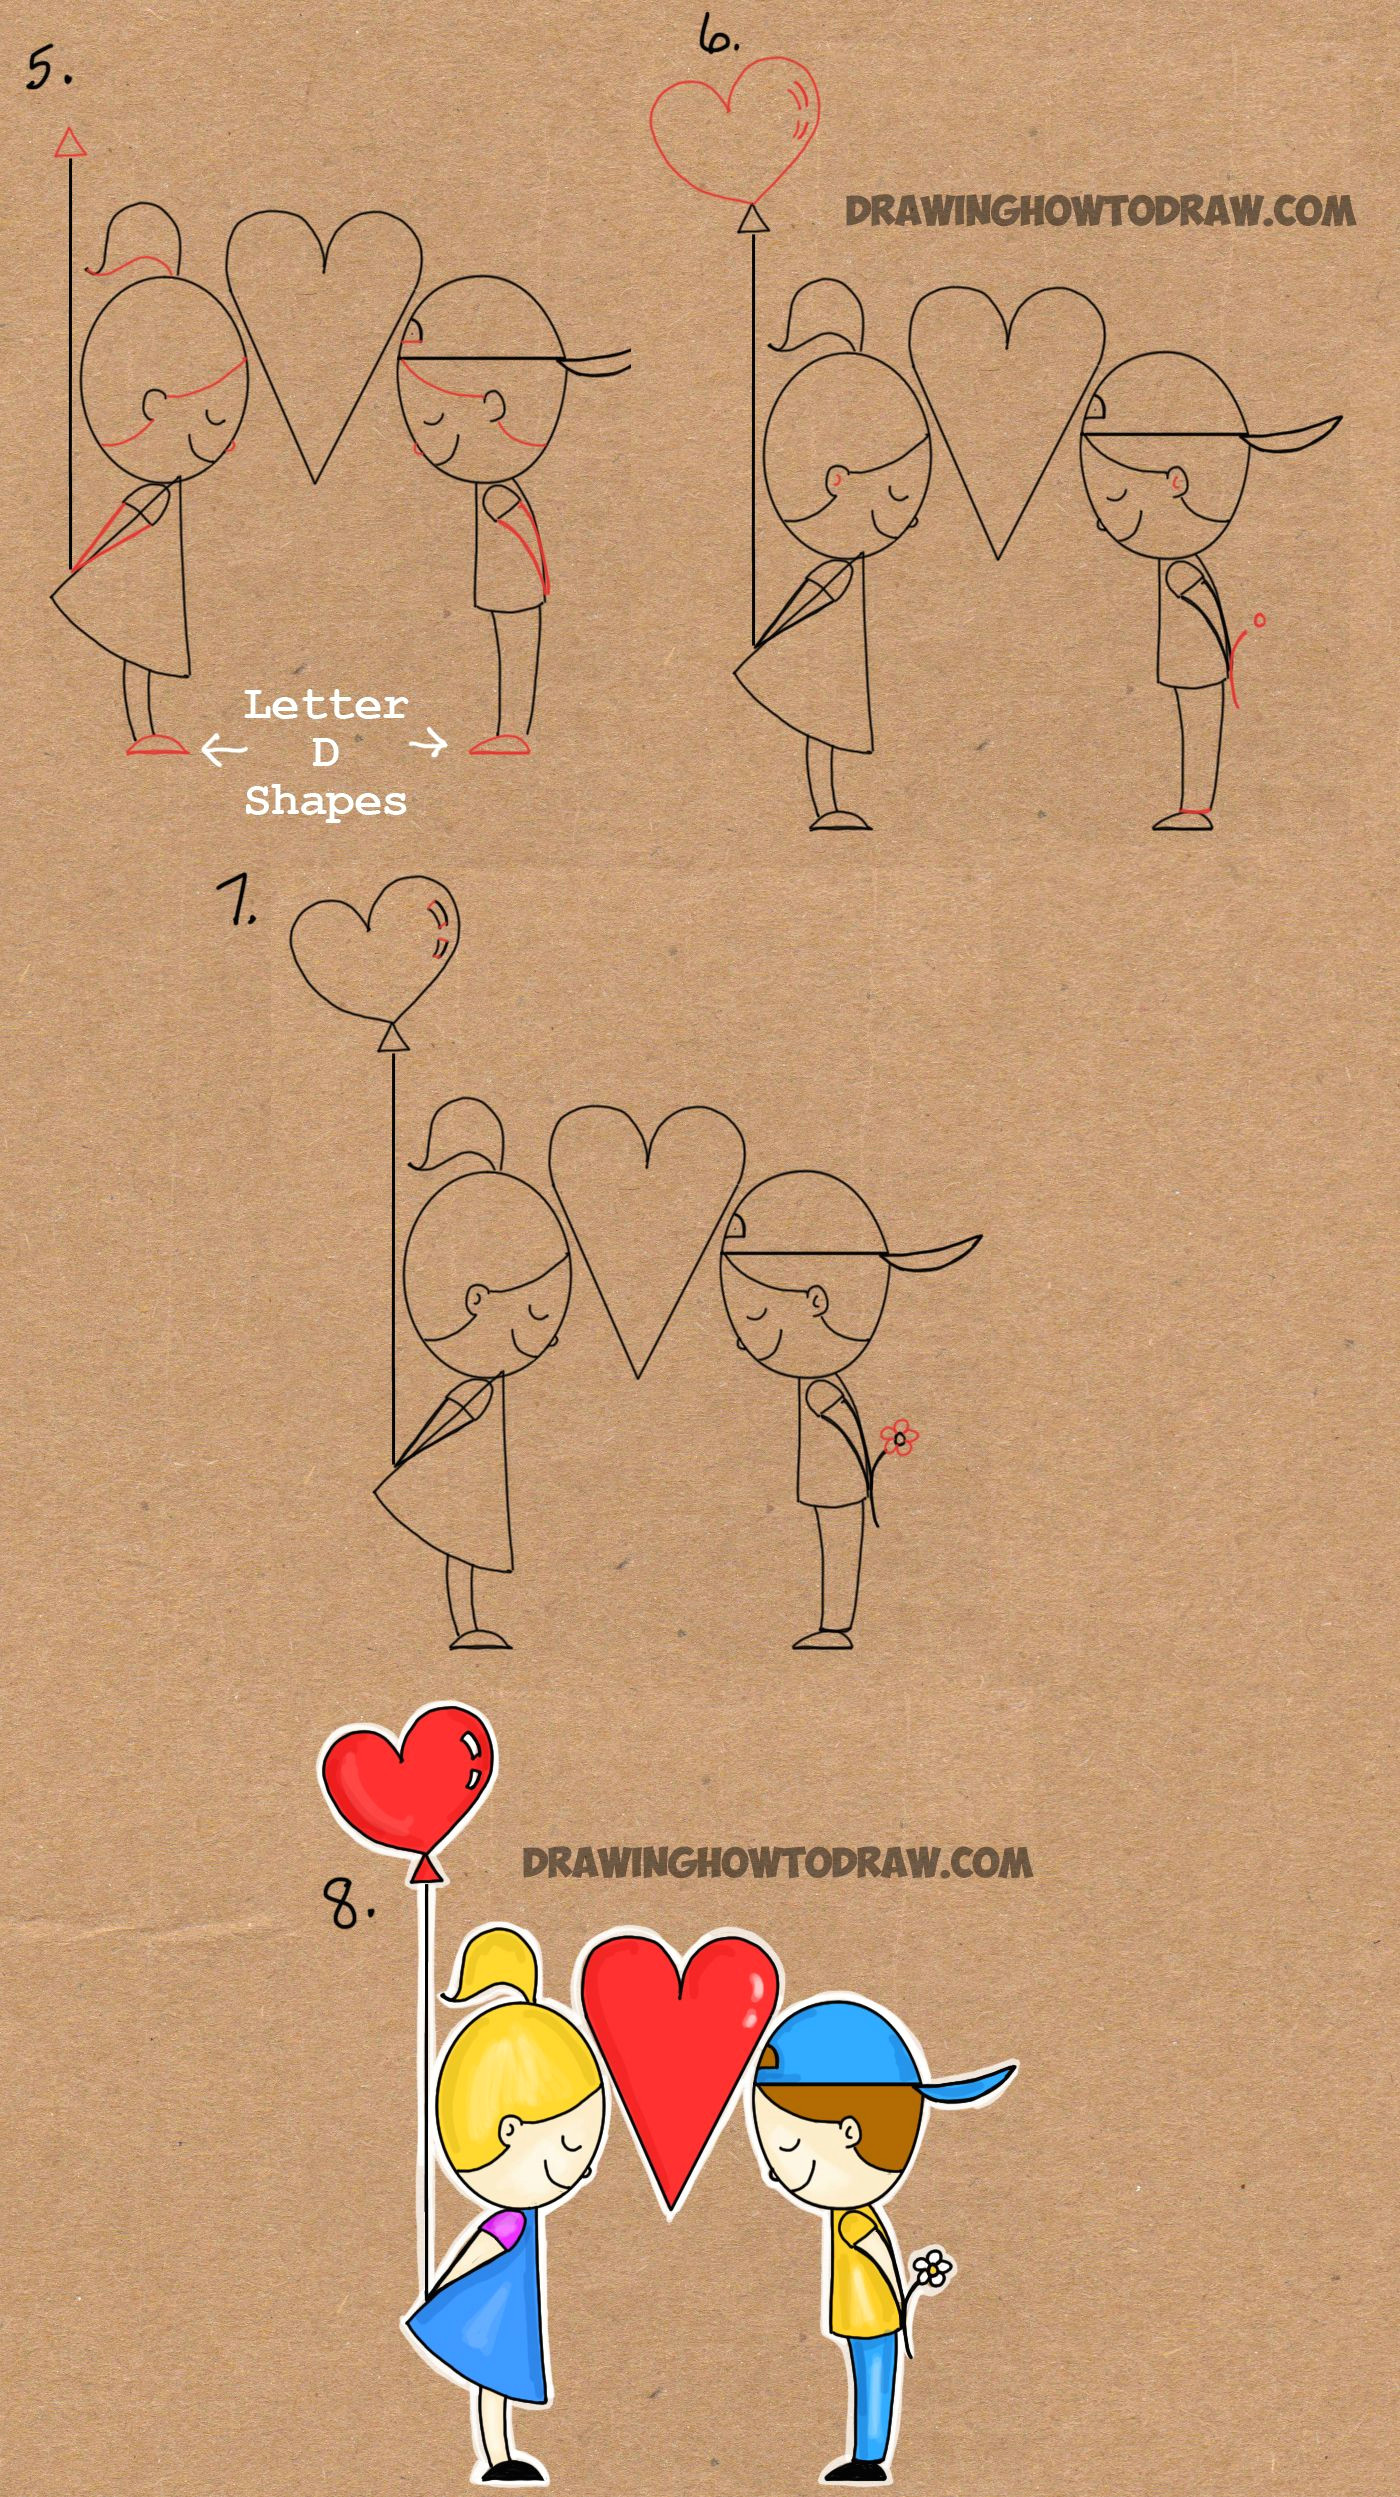 Drawing Cartoons Love How to Draw Cartoon Kids In Love From the Word Love In This Easy